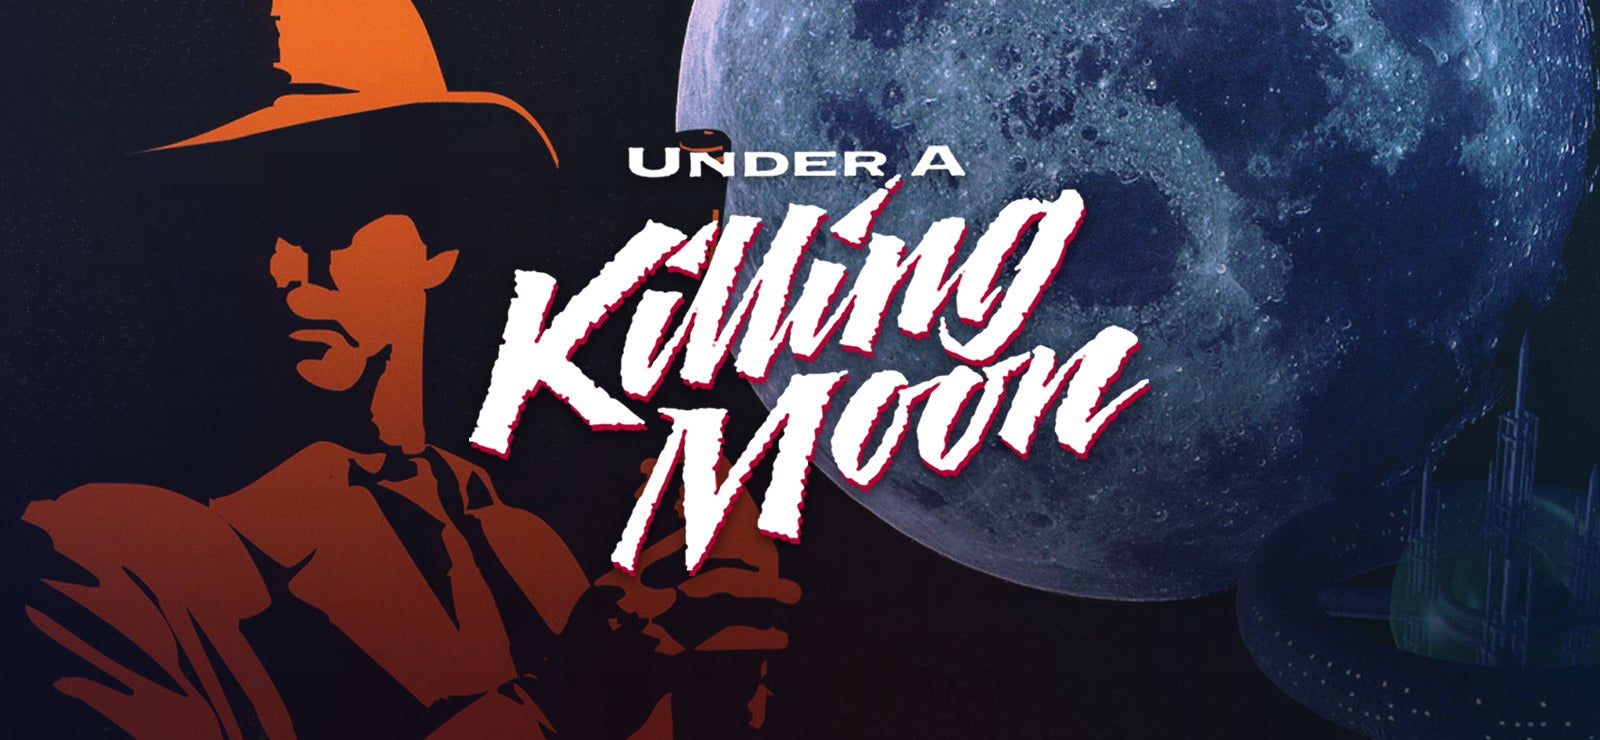 Image for Courtship Under a Killing Moon